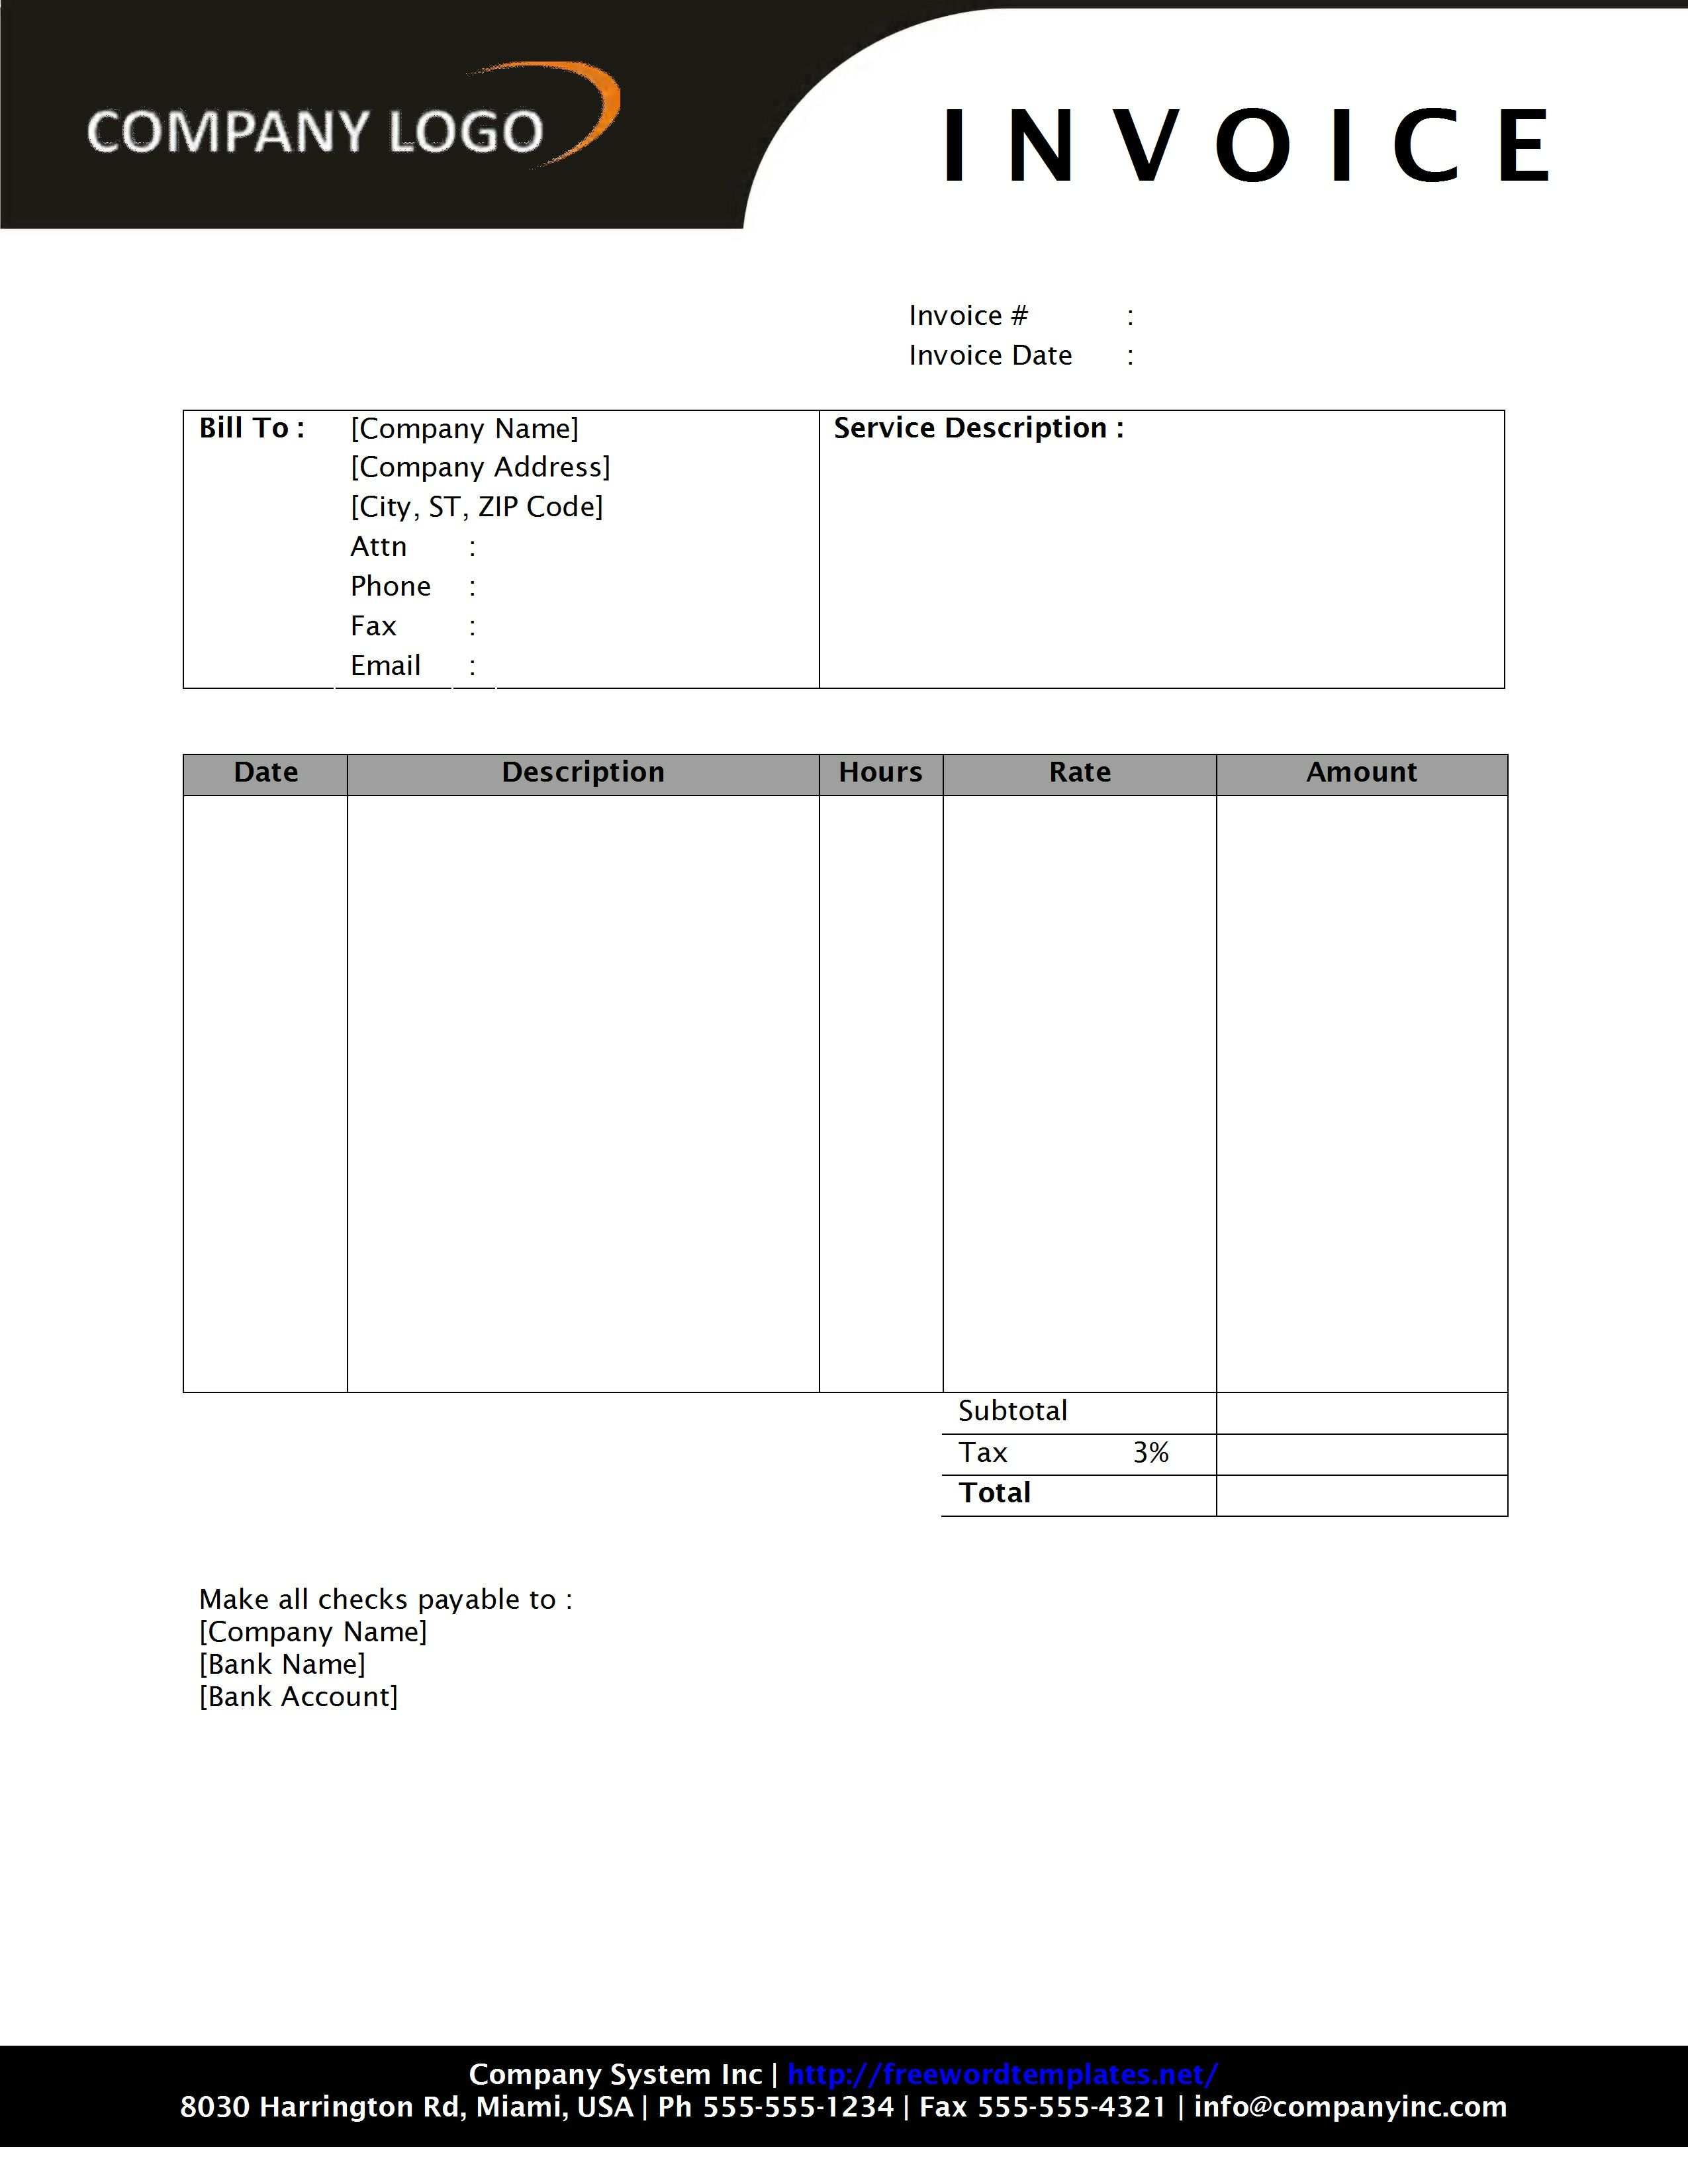 ms-word-invoice-template-free-download-invoice-template-ideas